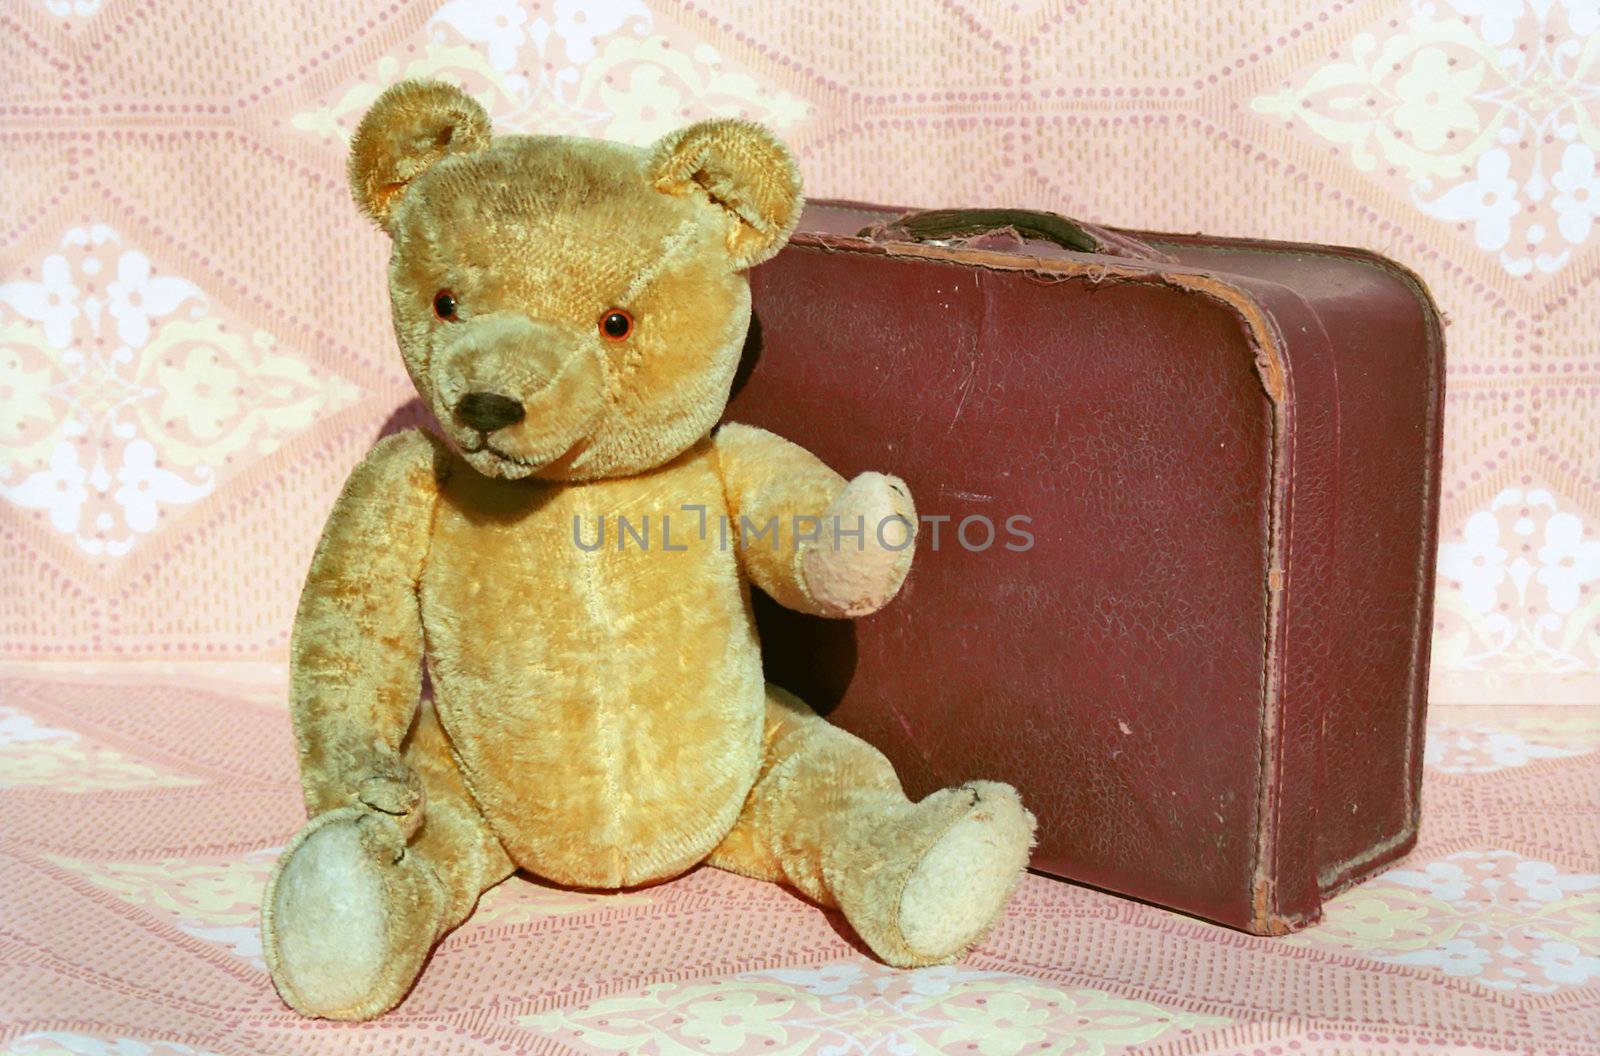 Old Teddy bear and very old leather suitcase